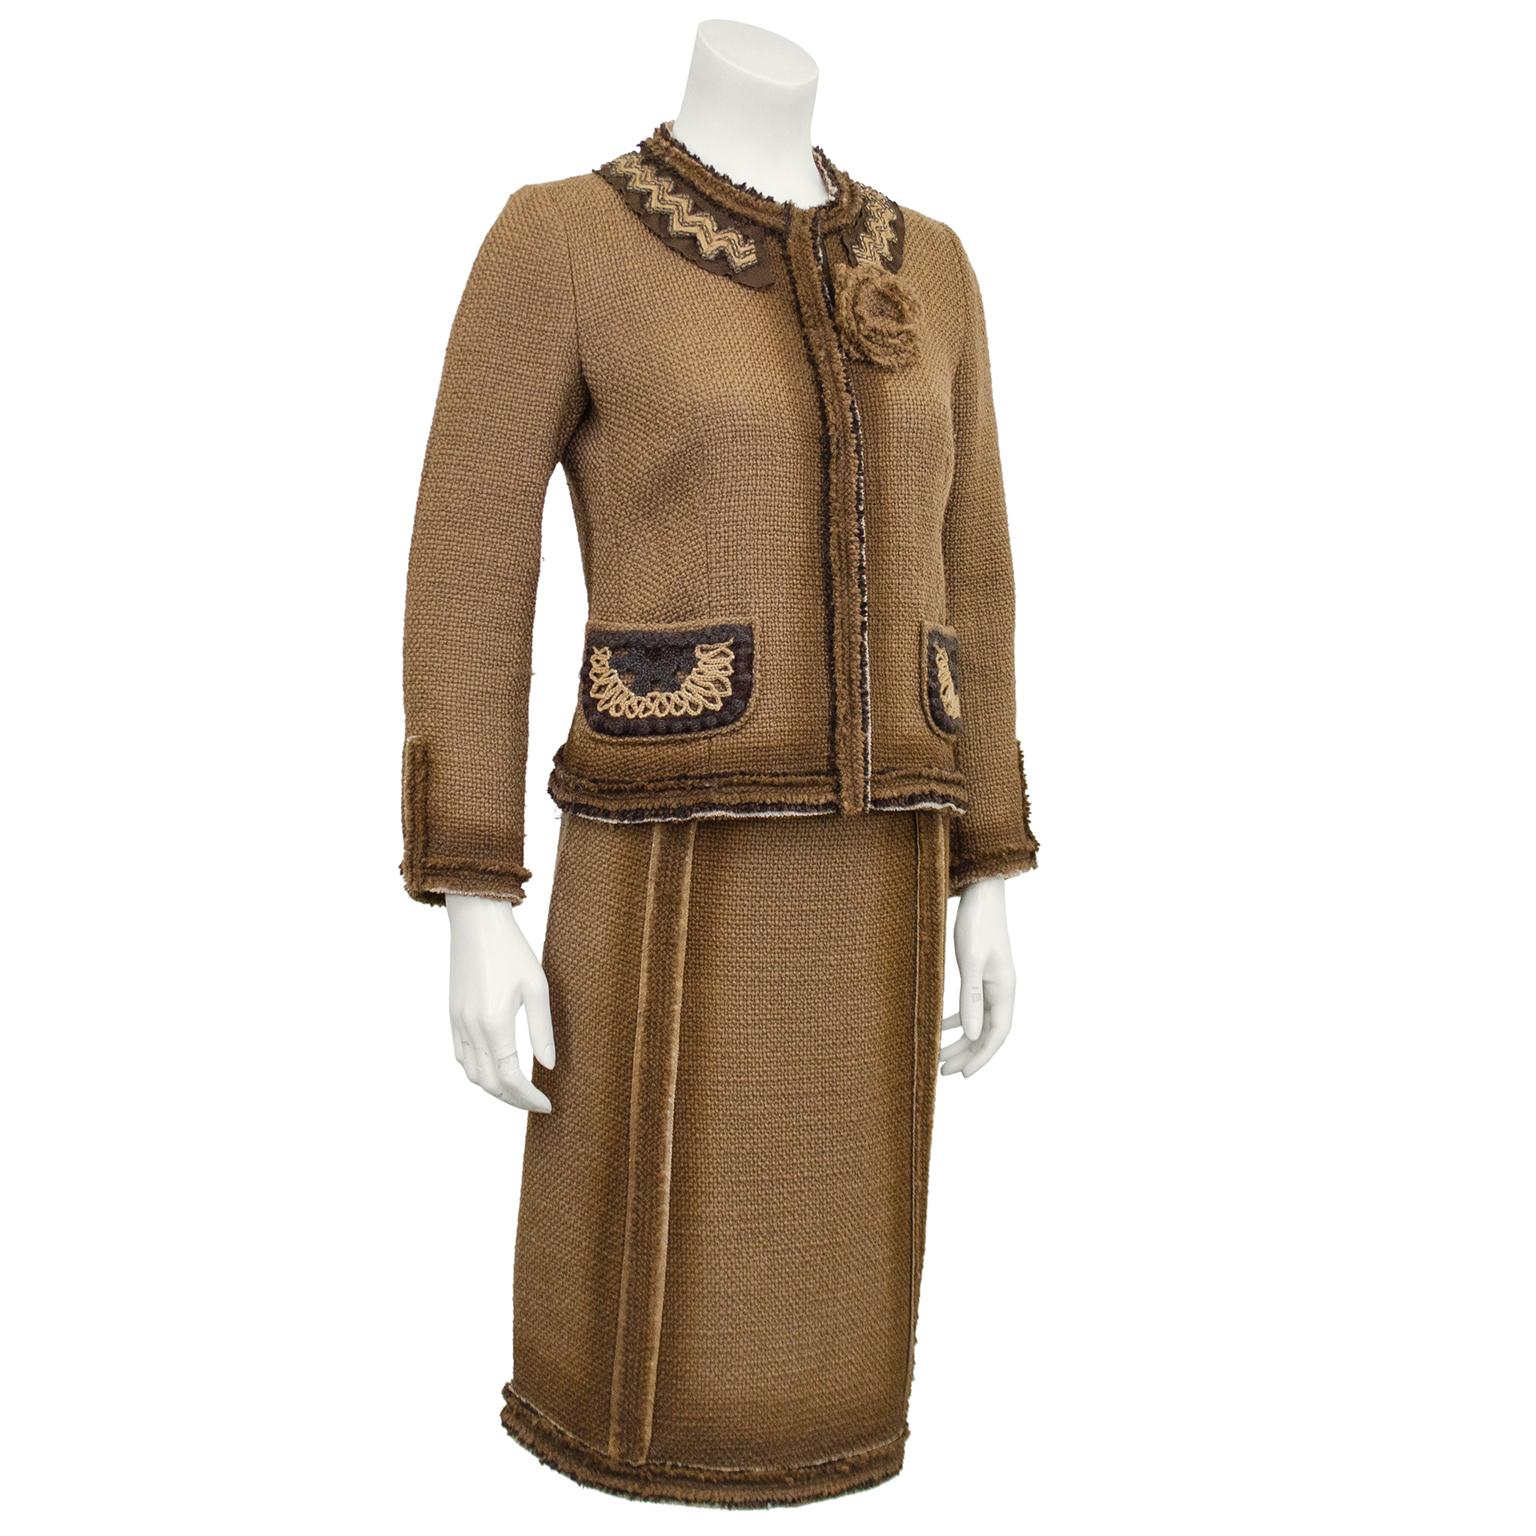 Prada tan woven linen boucle skirt suit from the 1990s. Jacket features crew neck collar with light tan and brown macrame and beaded chevron details and a canvas flower pin. Small brown and tan crochet patch pockets. High waisted very slight a-line